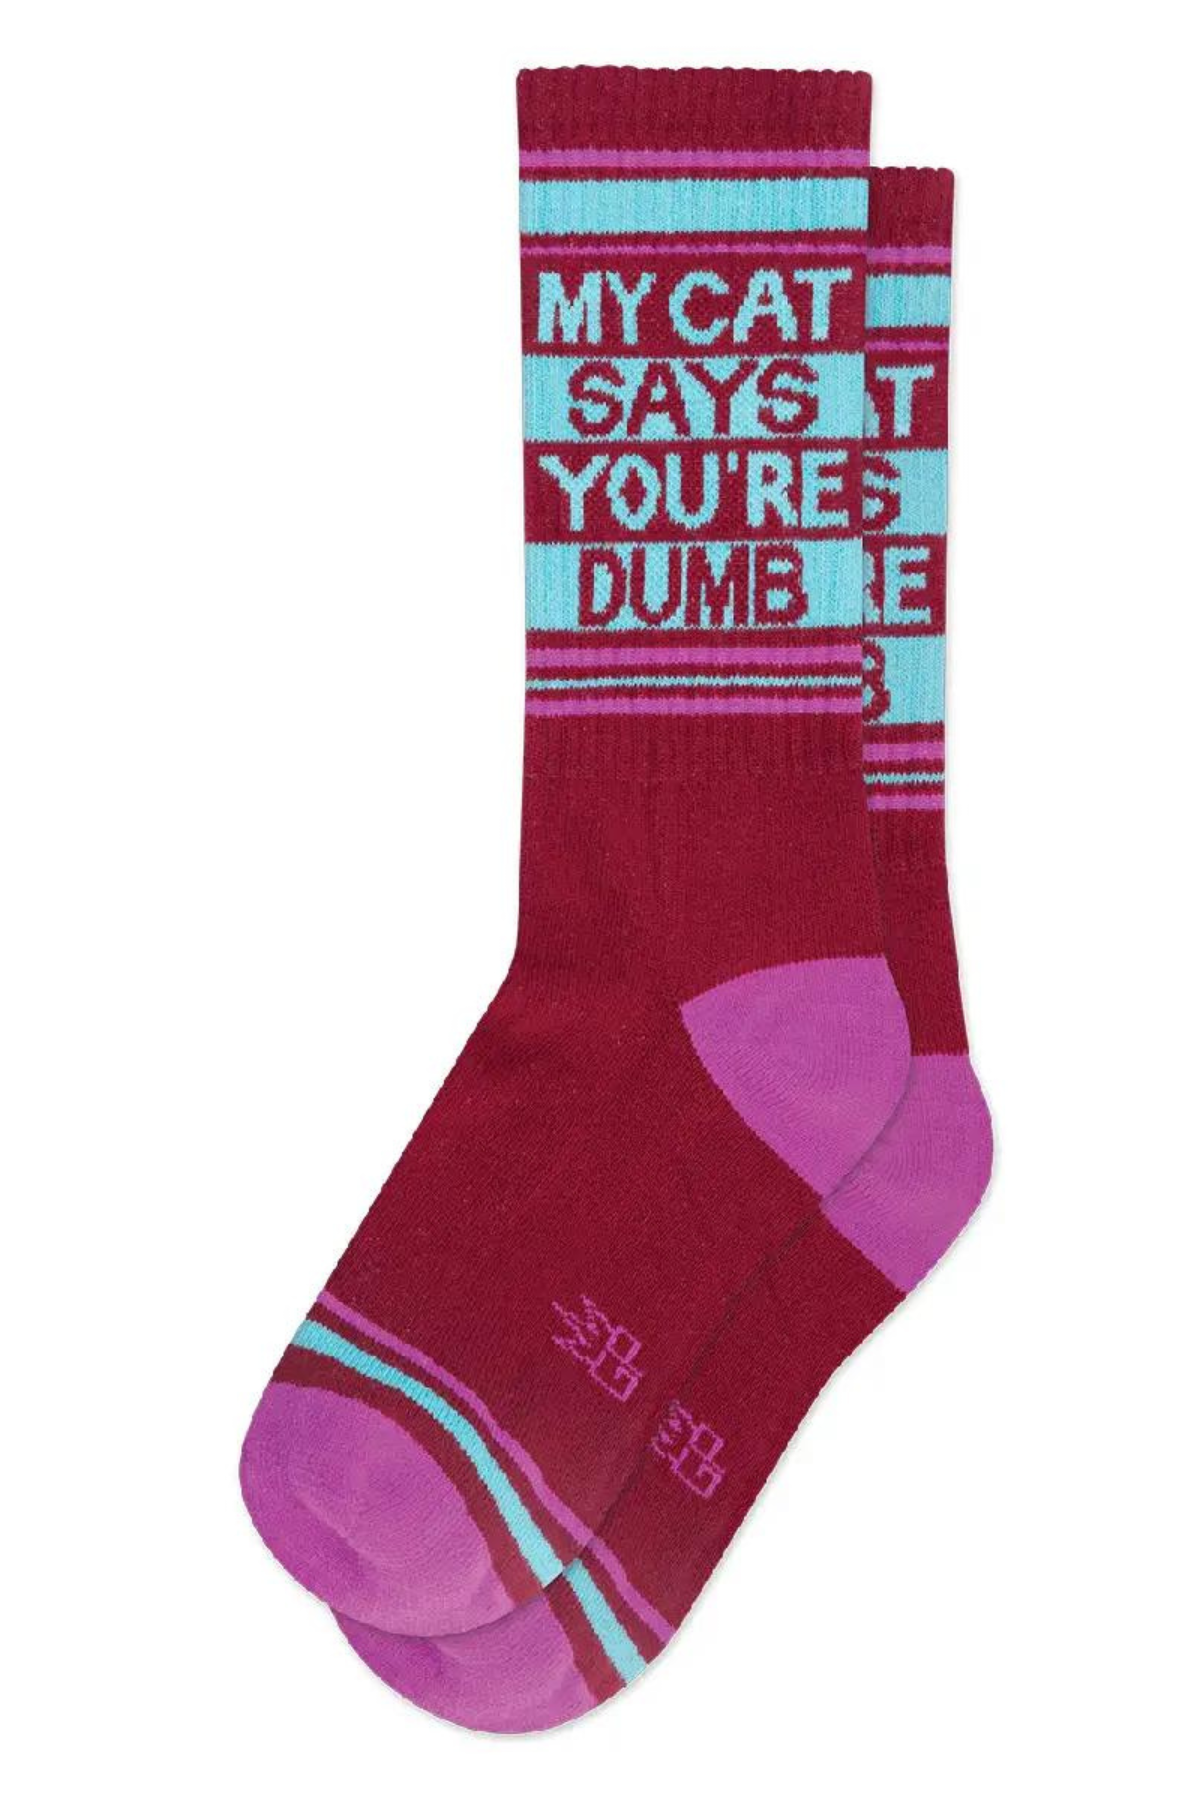 My Cat Says Youre Dumb Socks, Essentials Acc by Gumball Poodle | LIT Boutique